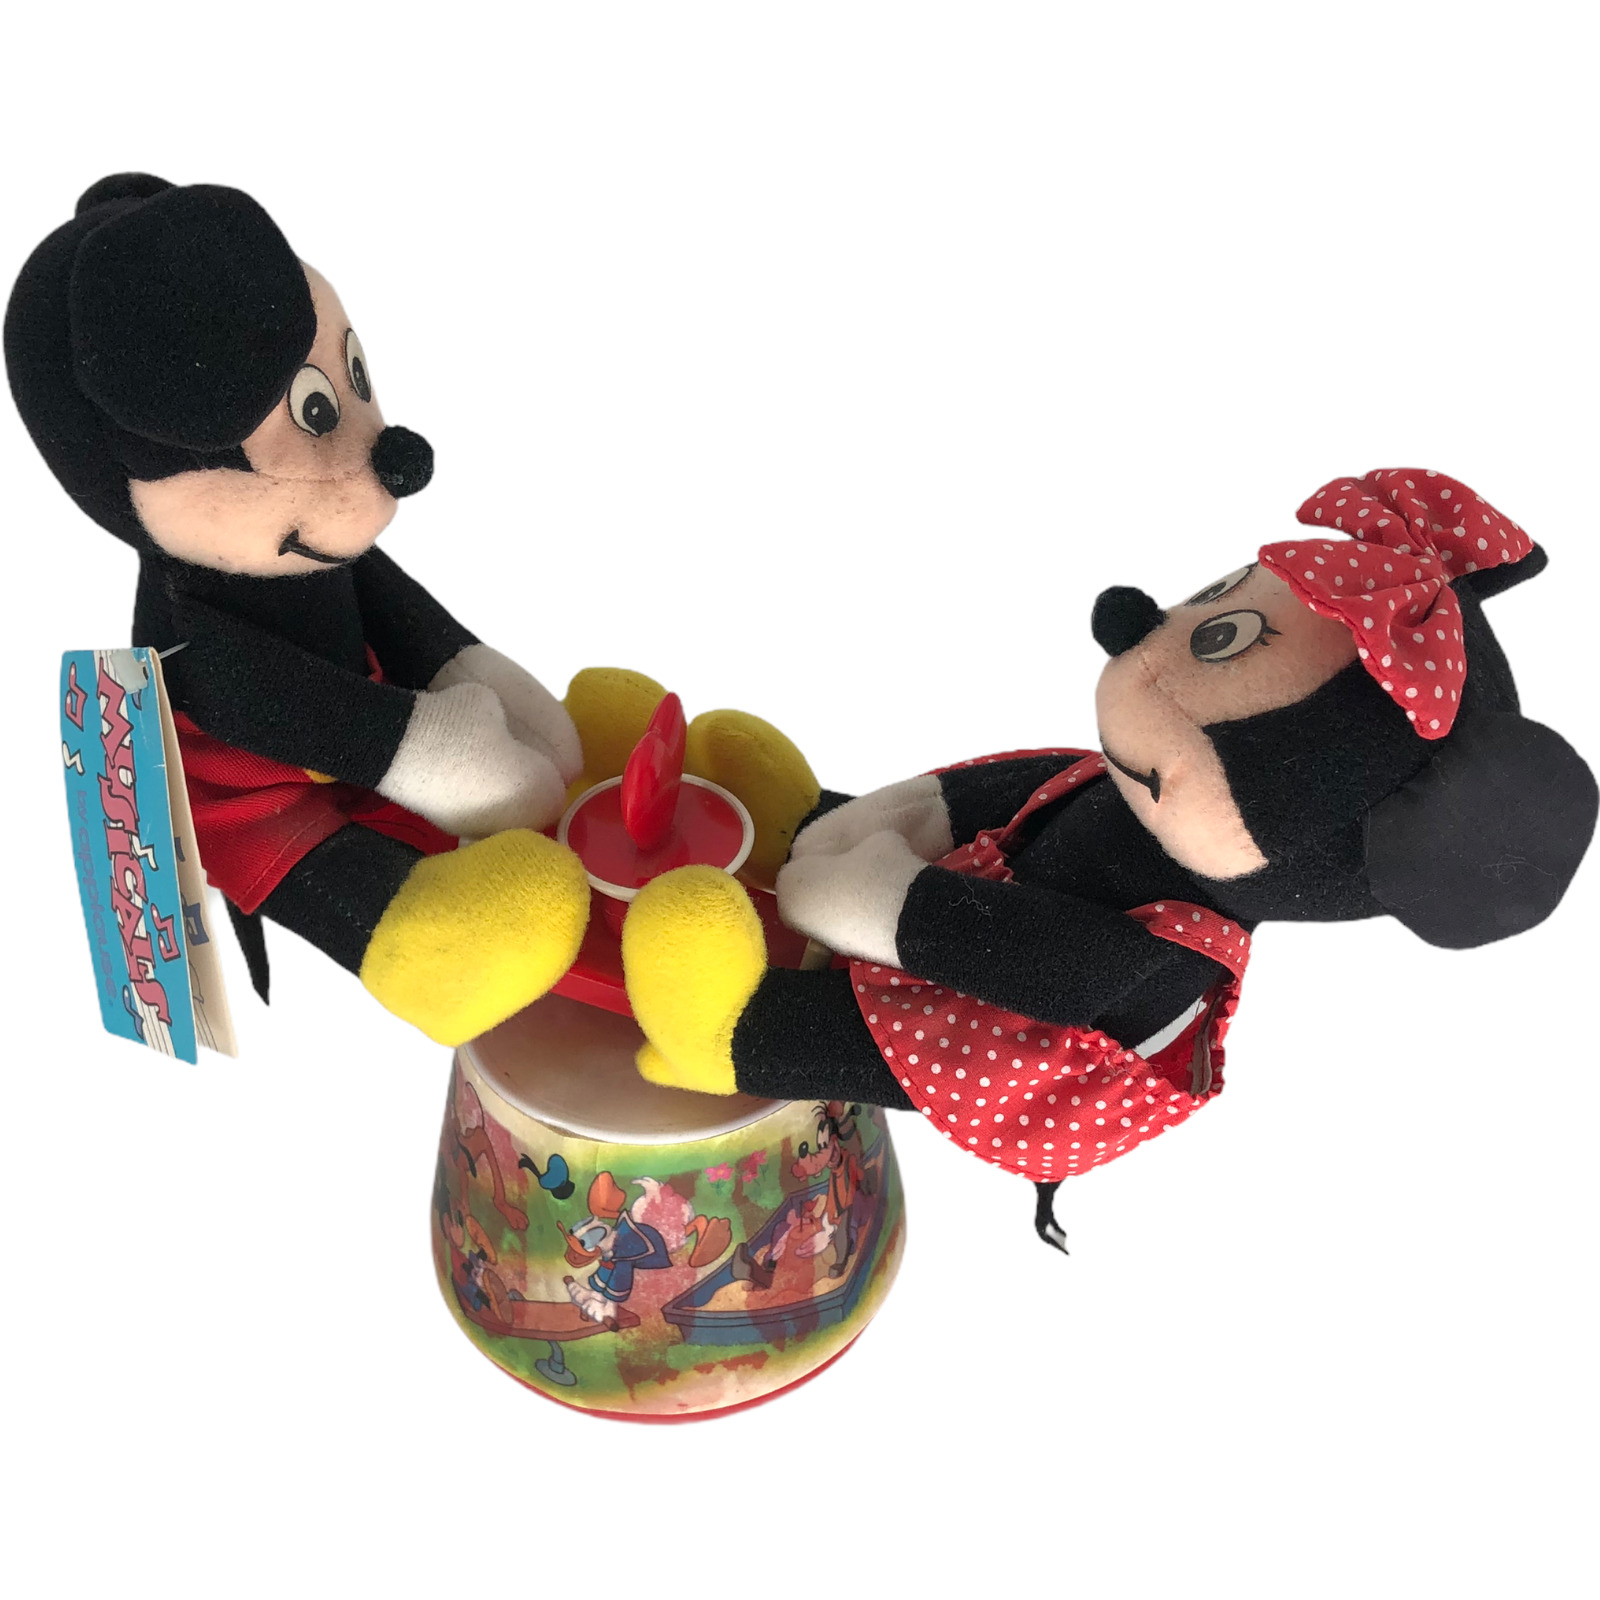 VTG Applause Wind Up Musical Mickey & Minnie Mouse Club March Spinning See Saw